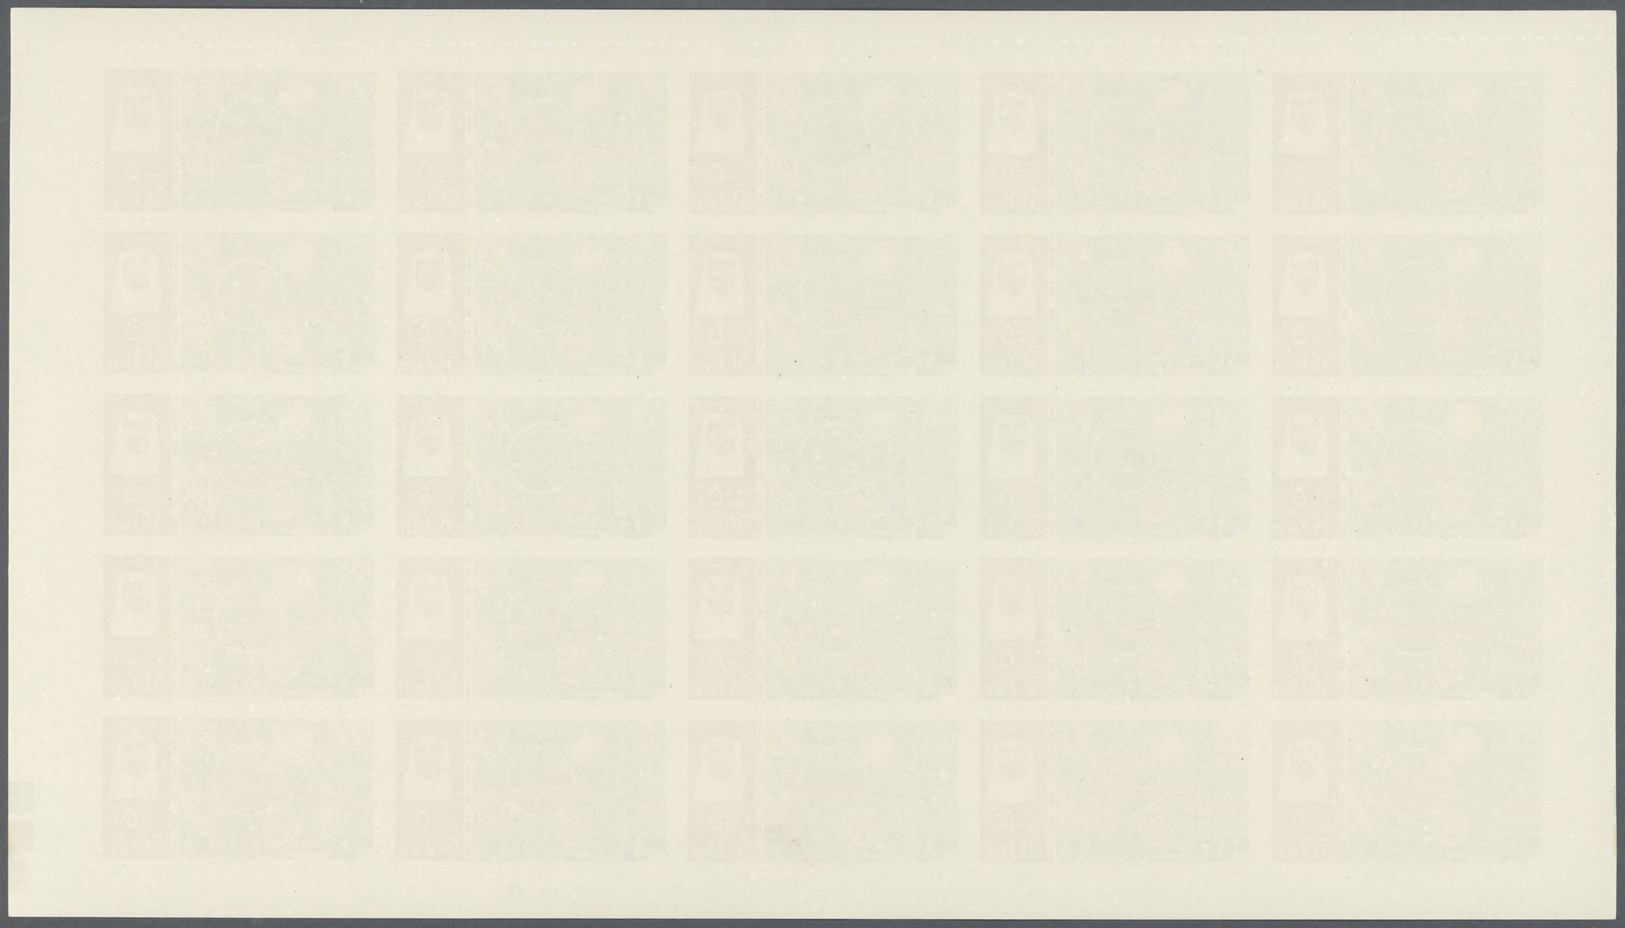 ** Katar / Qatar: 1965, ITU imperforate, complete set of eight values as sheets of 25, with plate numbers "1A" resp. "1B